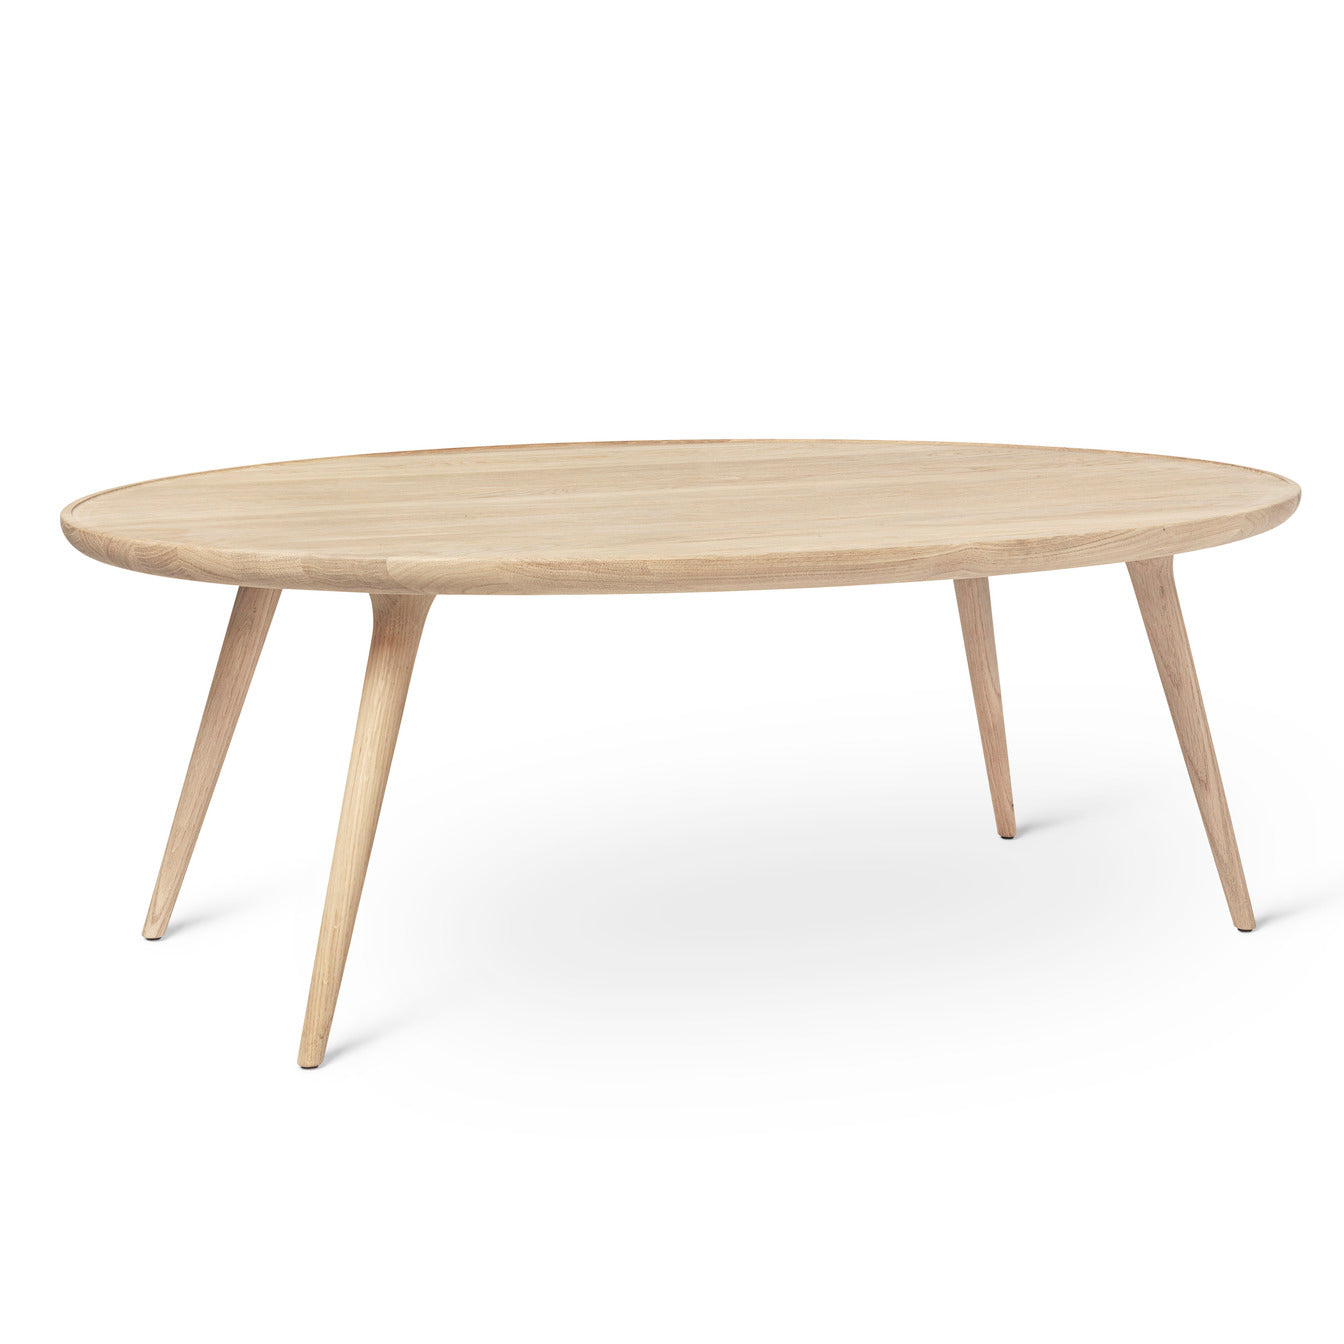 Accent Oval Lounge Table, Sustainable Oak